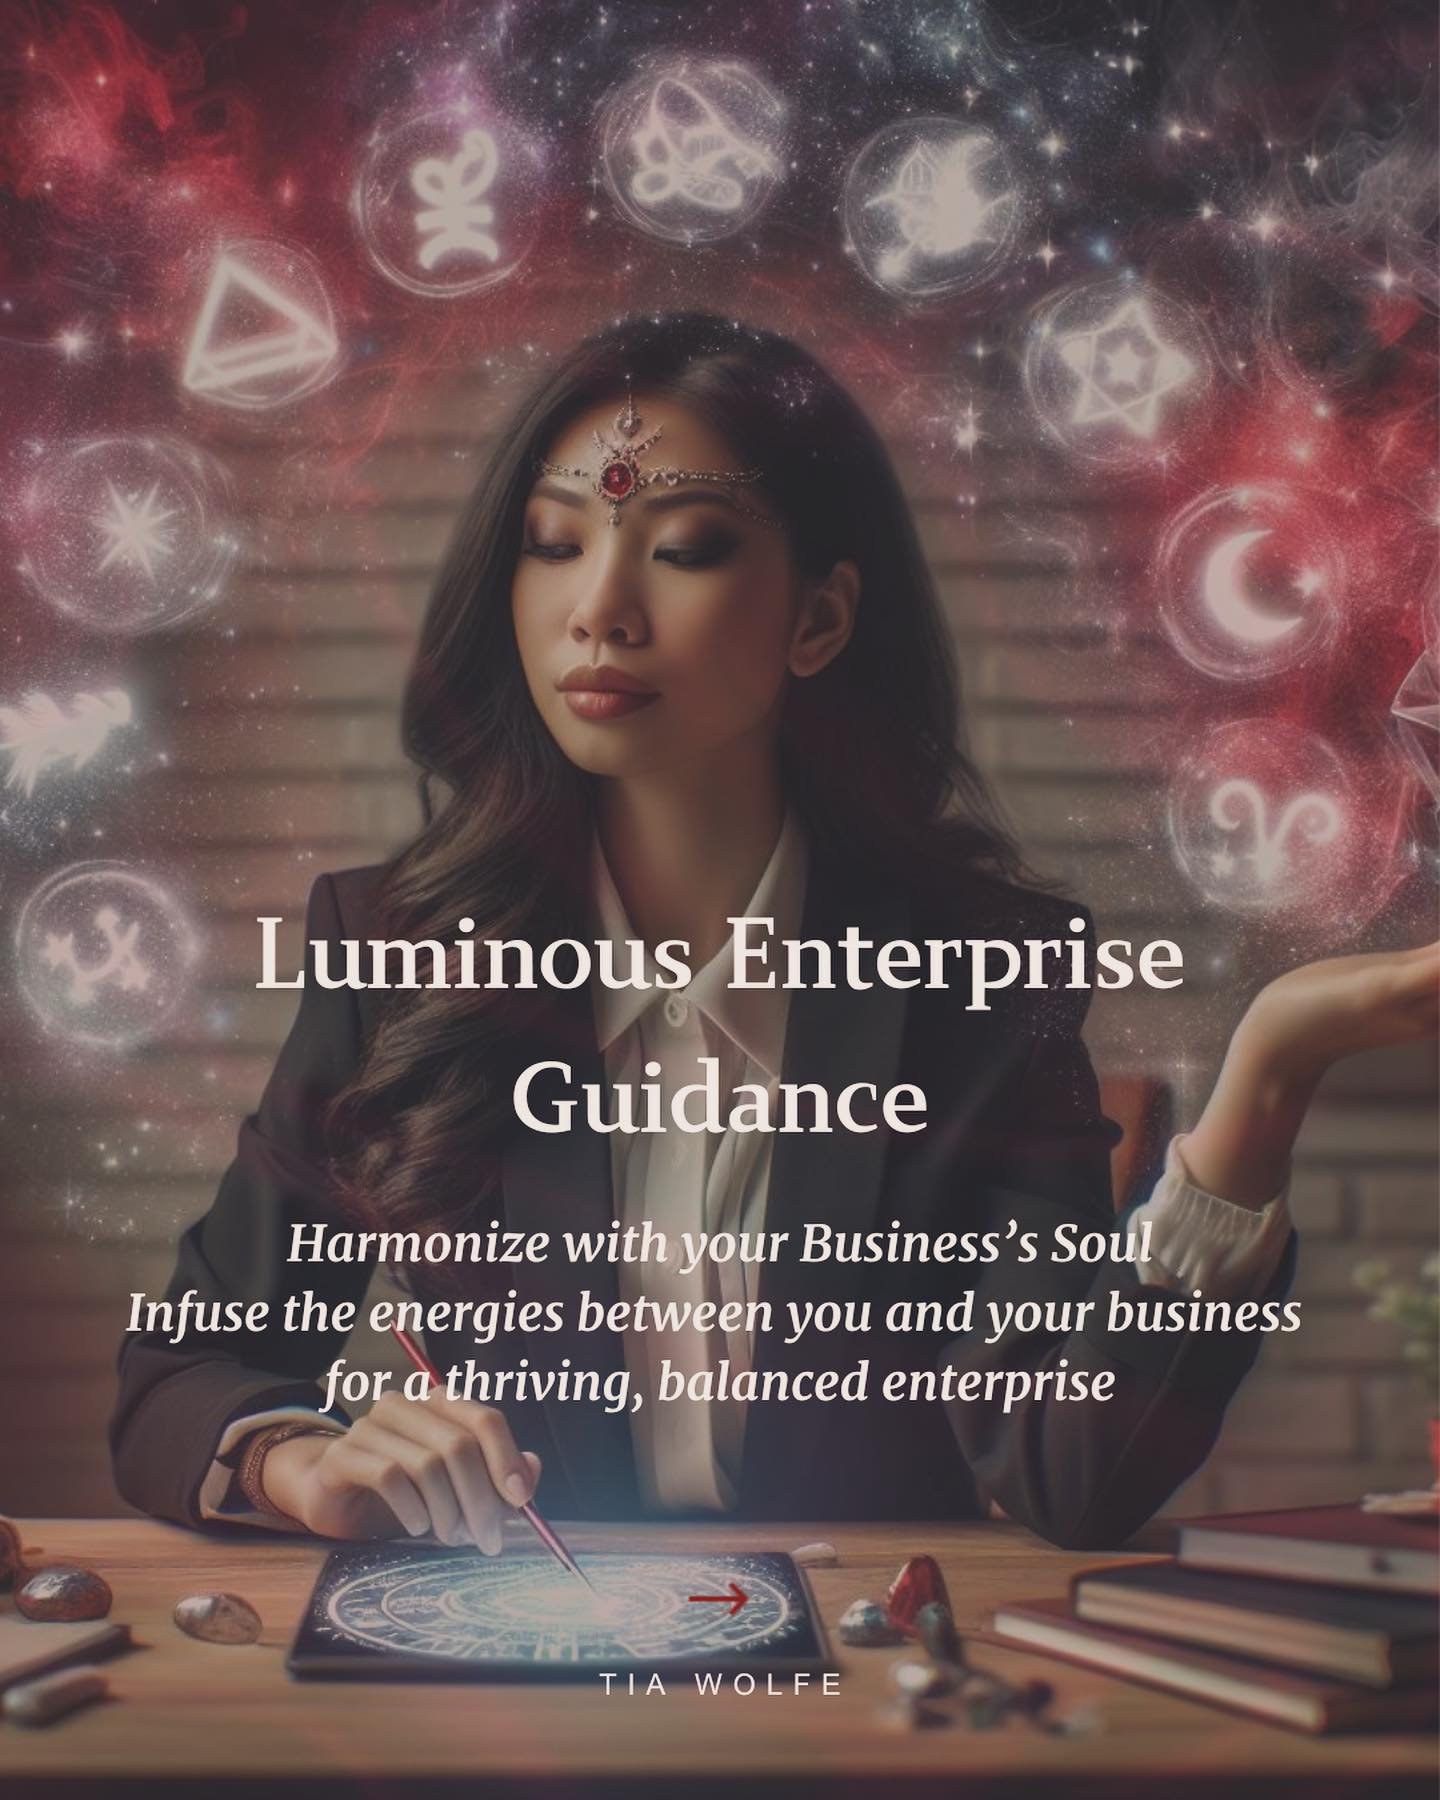 Welcome to Luminous Enterprise Guidance! 🔥

This is not your typical business reading where I tell you how to market and craft your offers based off your birth chart. 

This is a business reading where we dive into the relationship between you and y